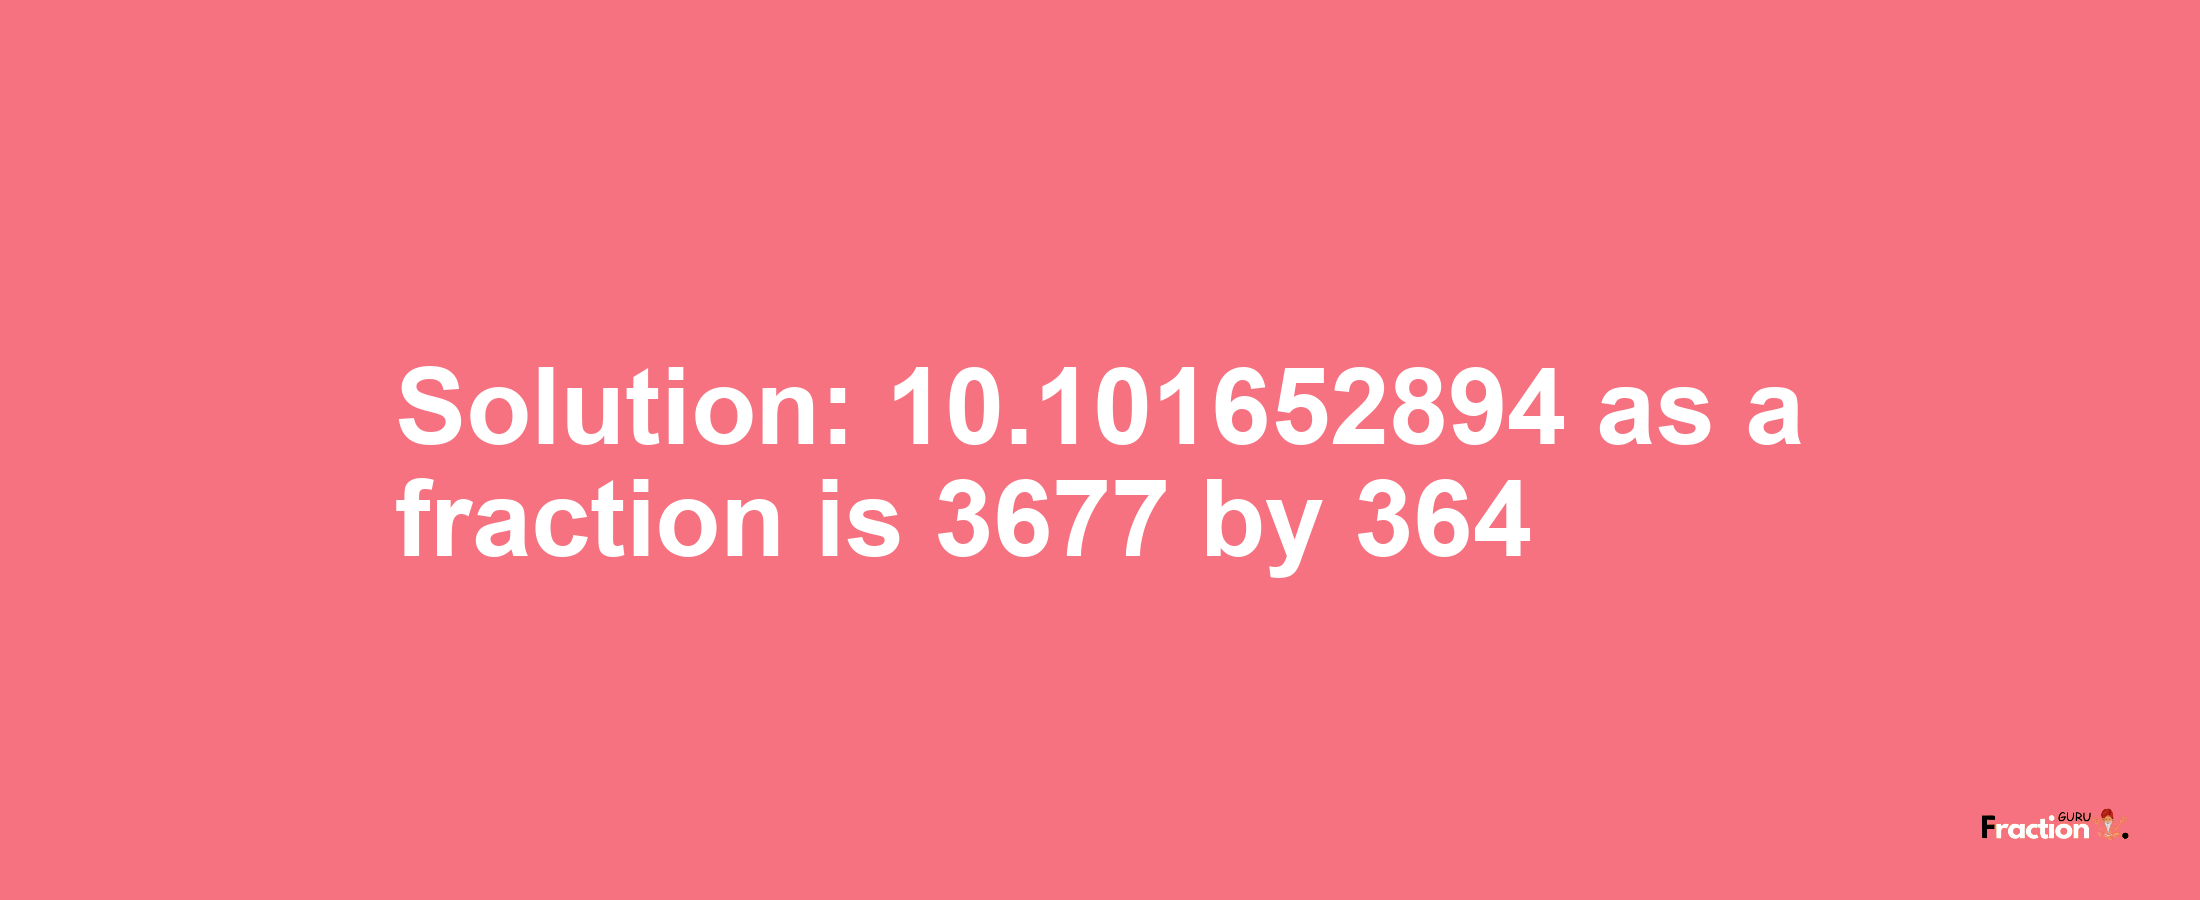 Solution:10.101652894 as a fraction is 3677/364